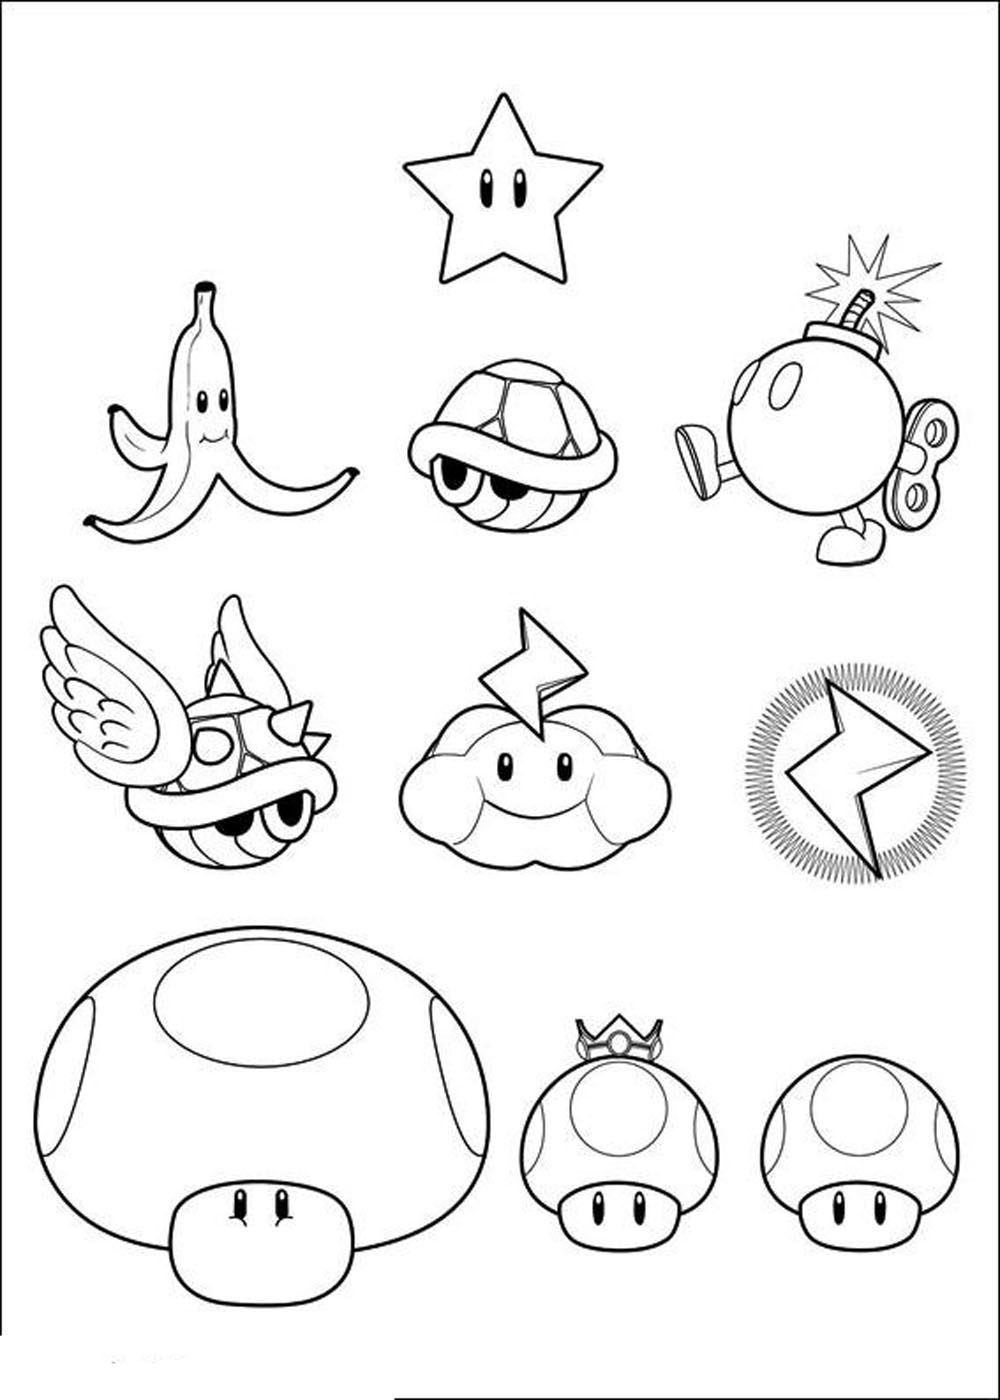 super-mario-coloring-pages-lovely-super-mario-happy-face-coloring-page